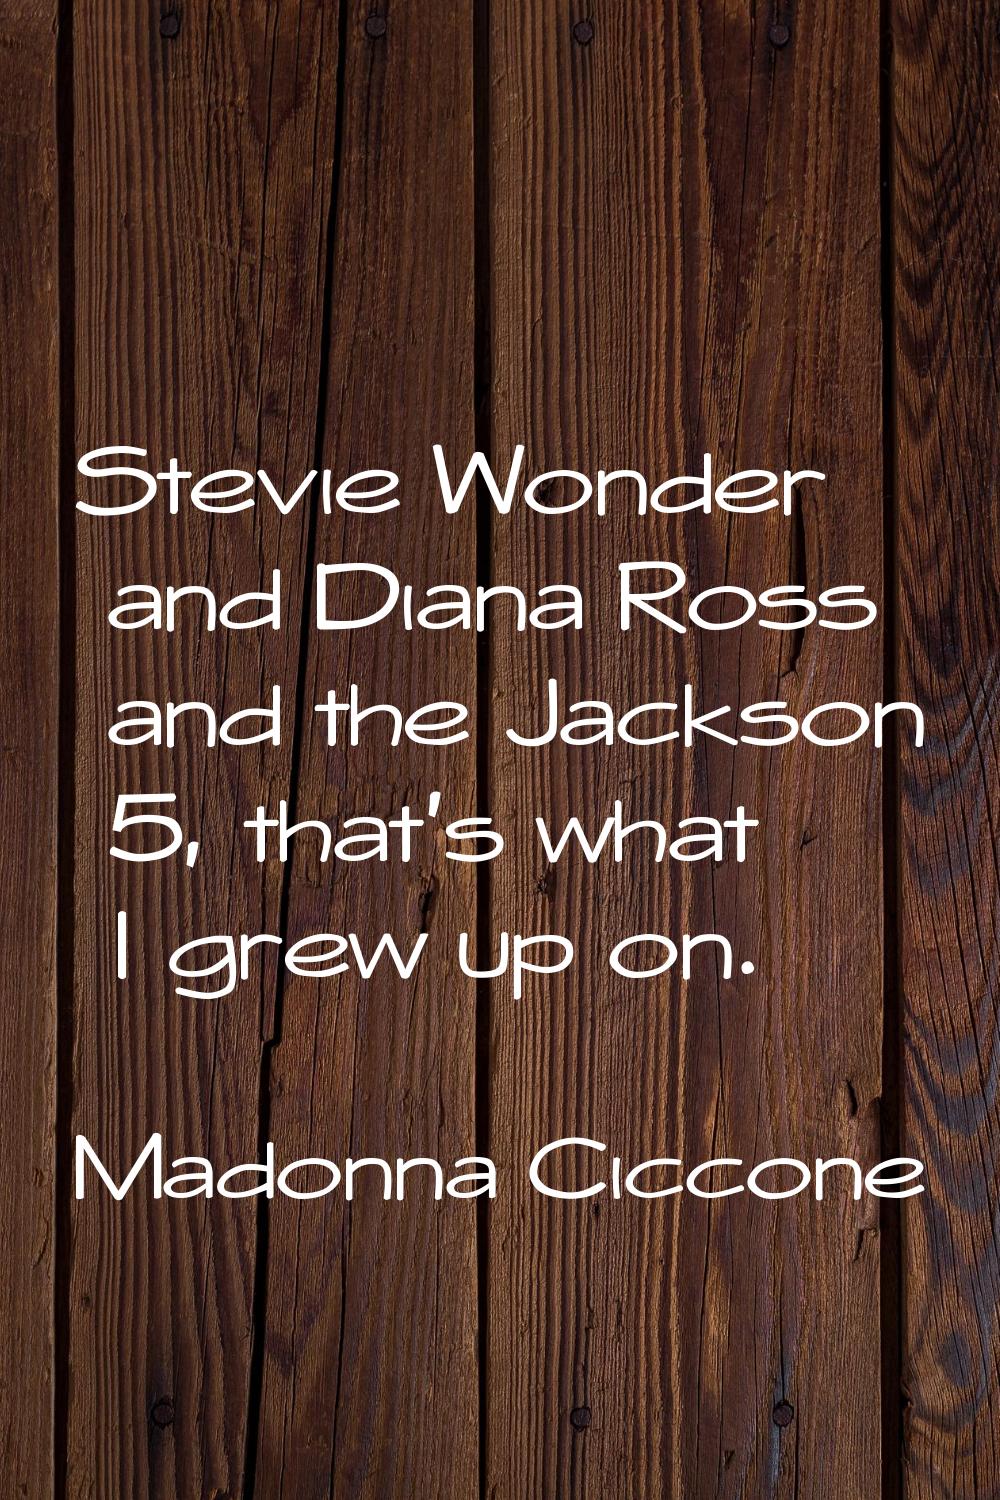 Stevie Wonder and Diana Ross and the Jackson 5, that's what I grew up on.